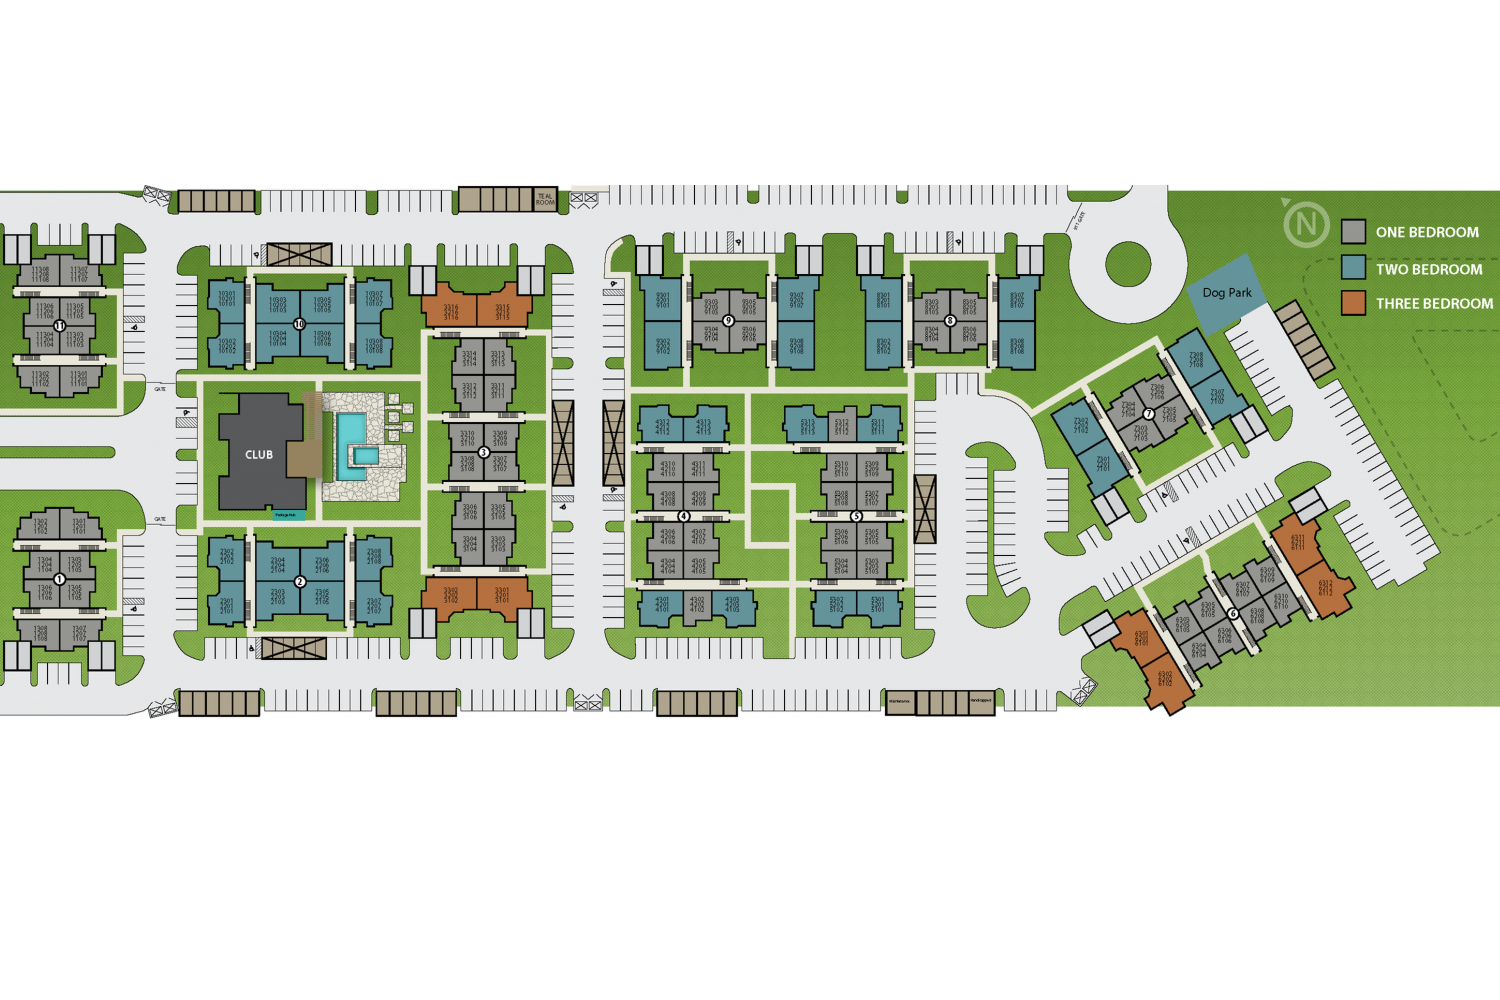 Image of Gated Community for The Grayson